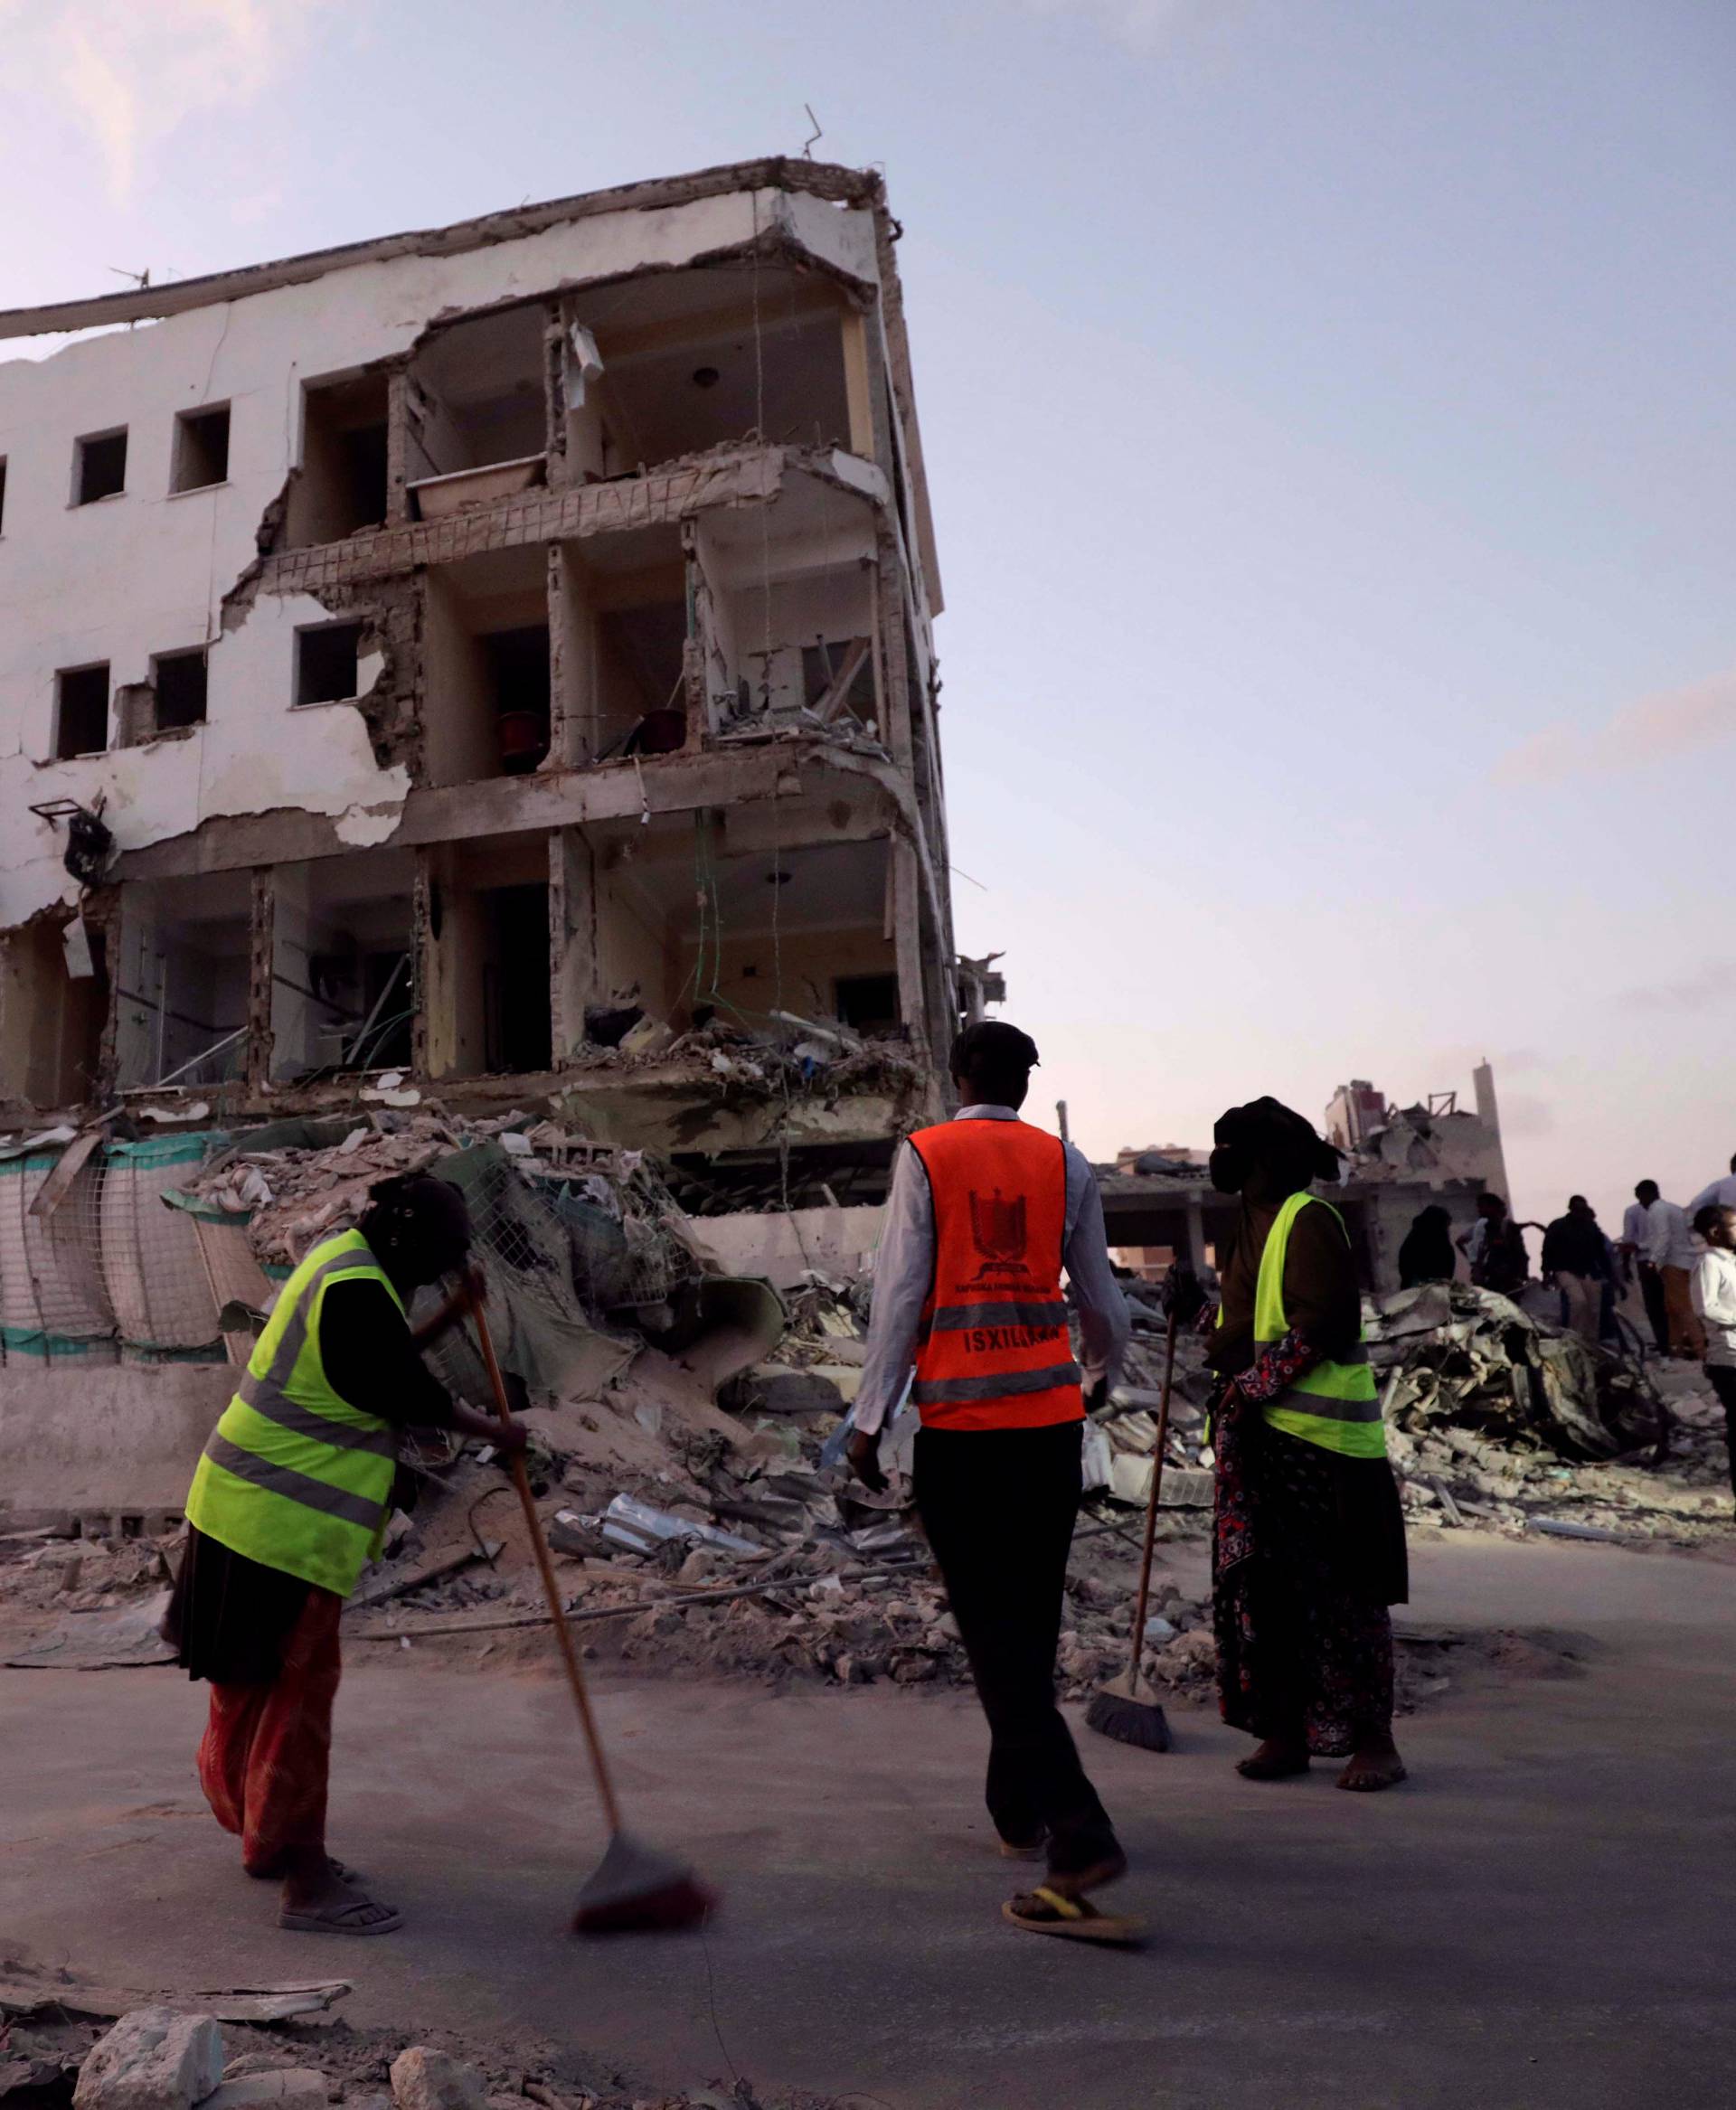 Workers clean rubble near damaged buildings after a suicide car bomb exploded, targeting a hotel in a business center in Maka Al Mukaram street, Mogadishu